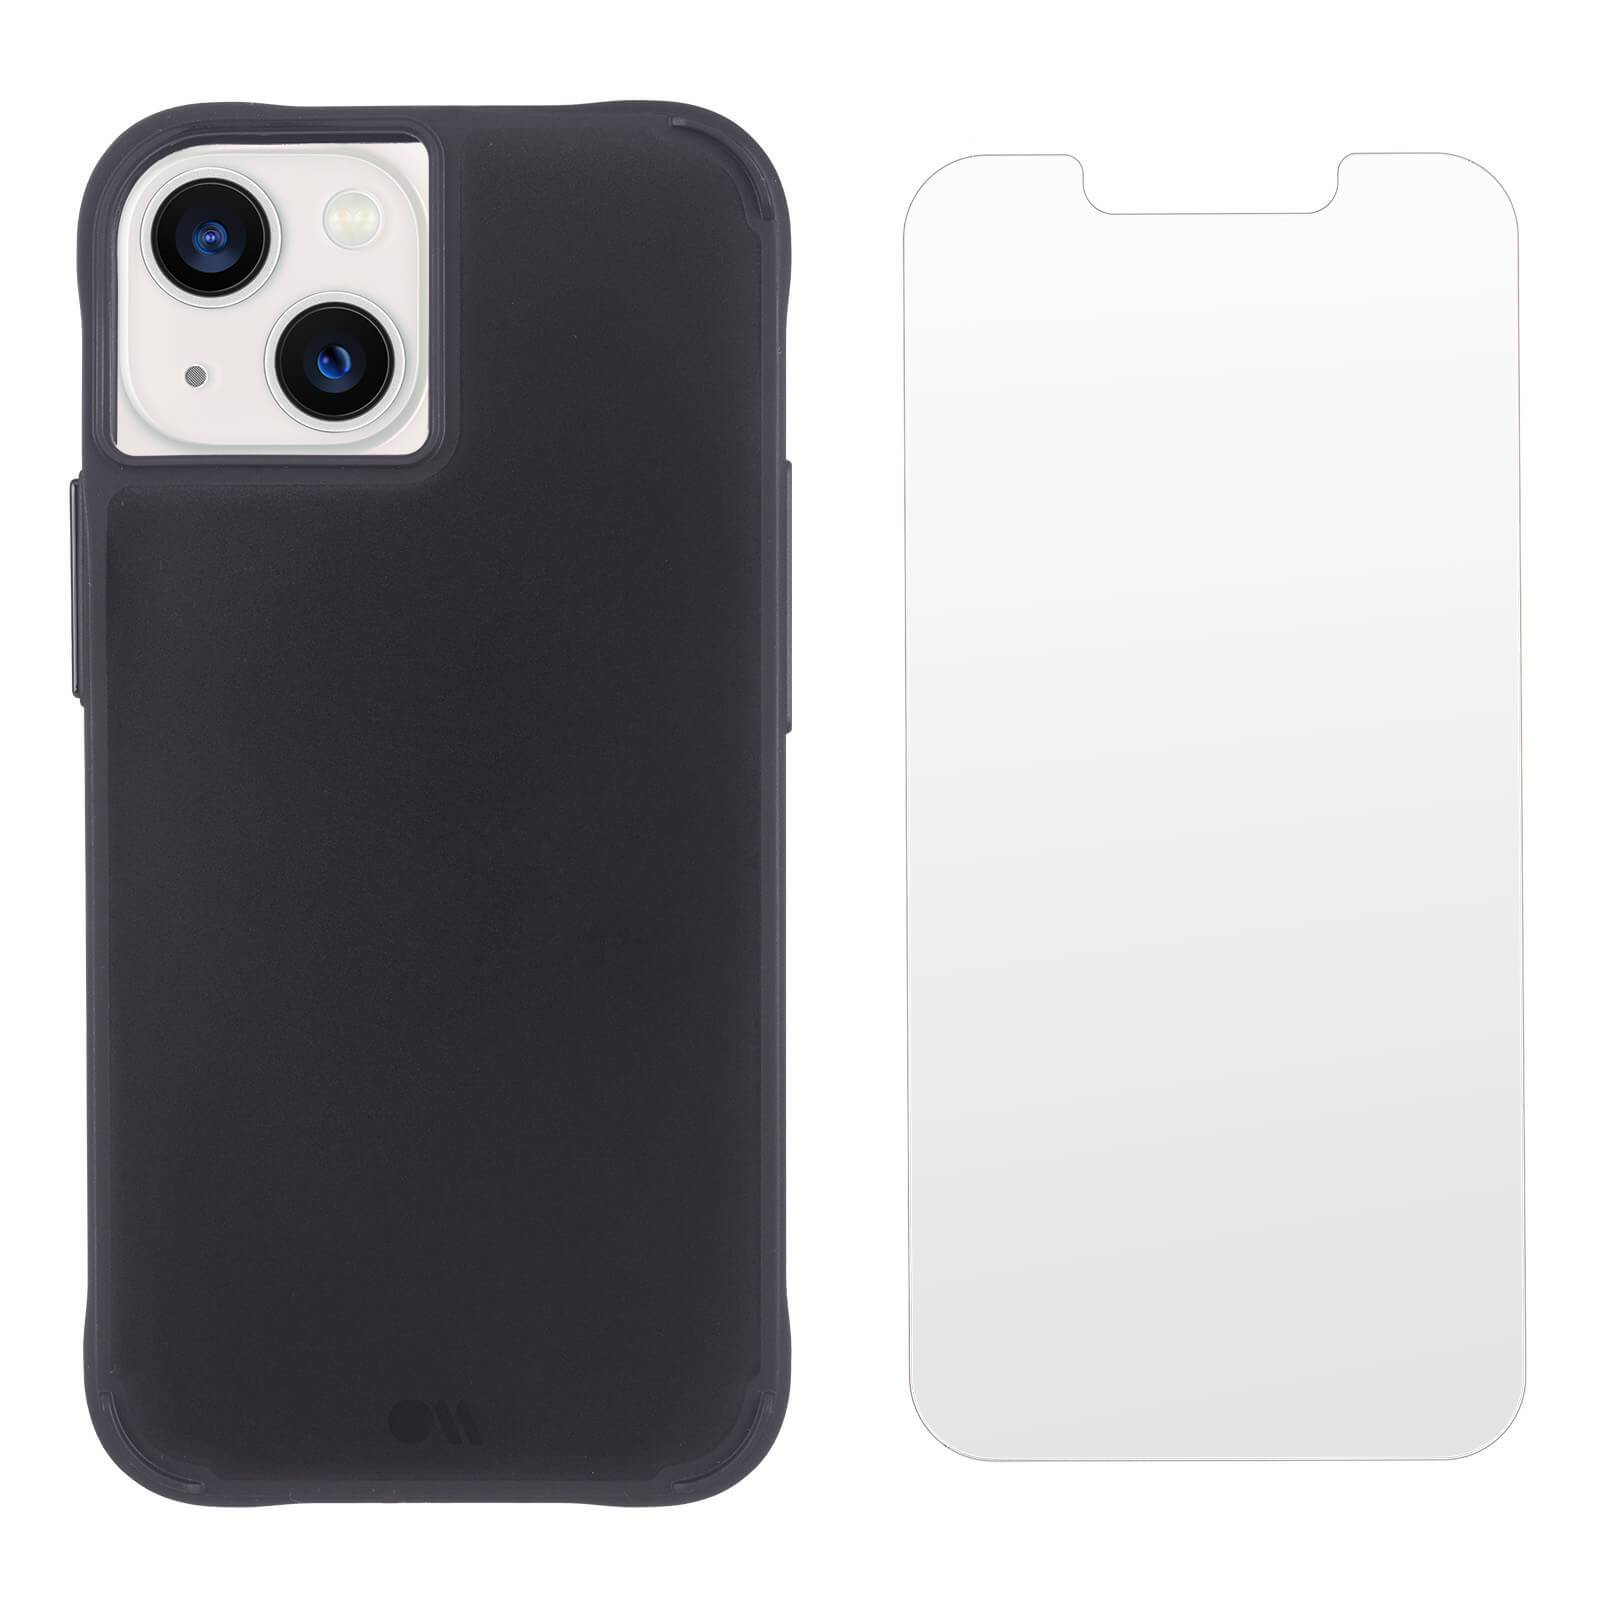 Tough Black case and screen protector included color::Black